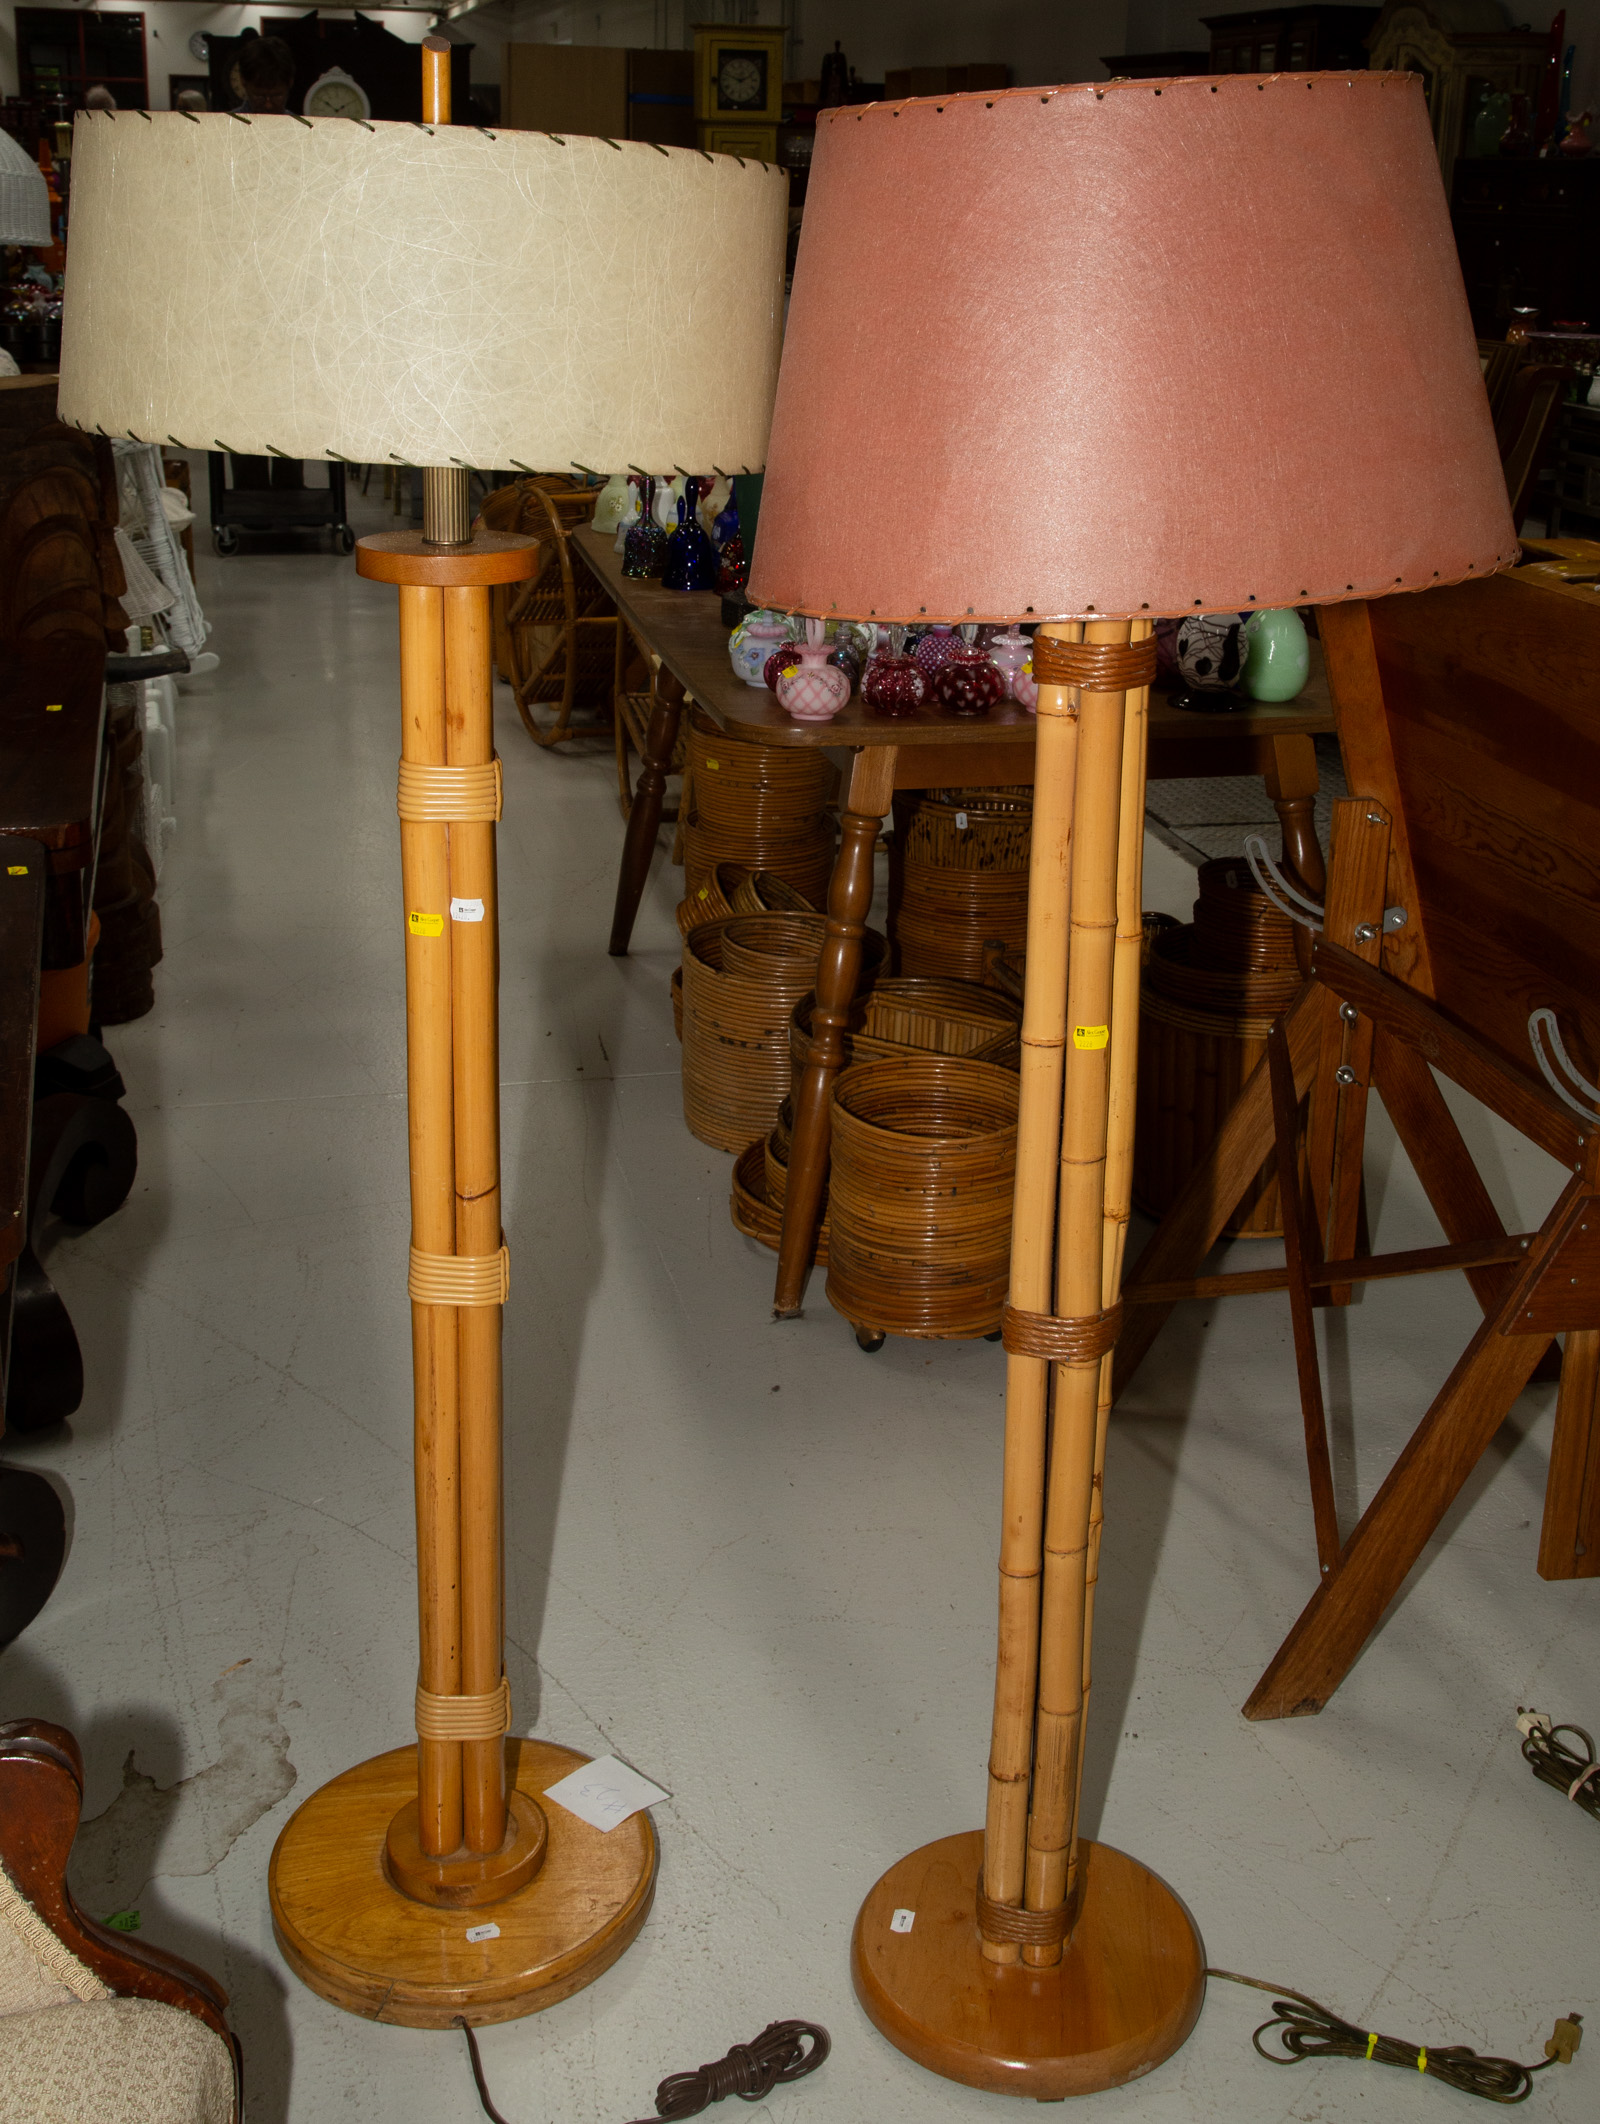 TWO PAUL FRANKL STYLE FLOOR LAMPS 2ea9d0